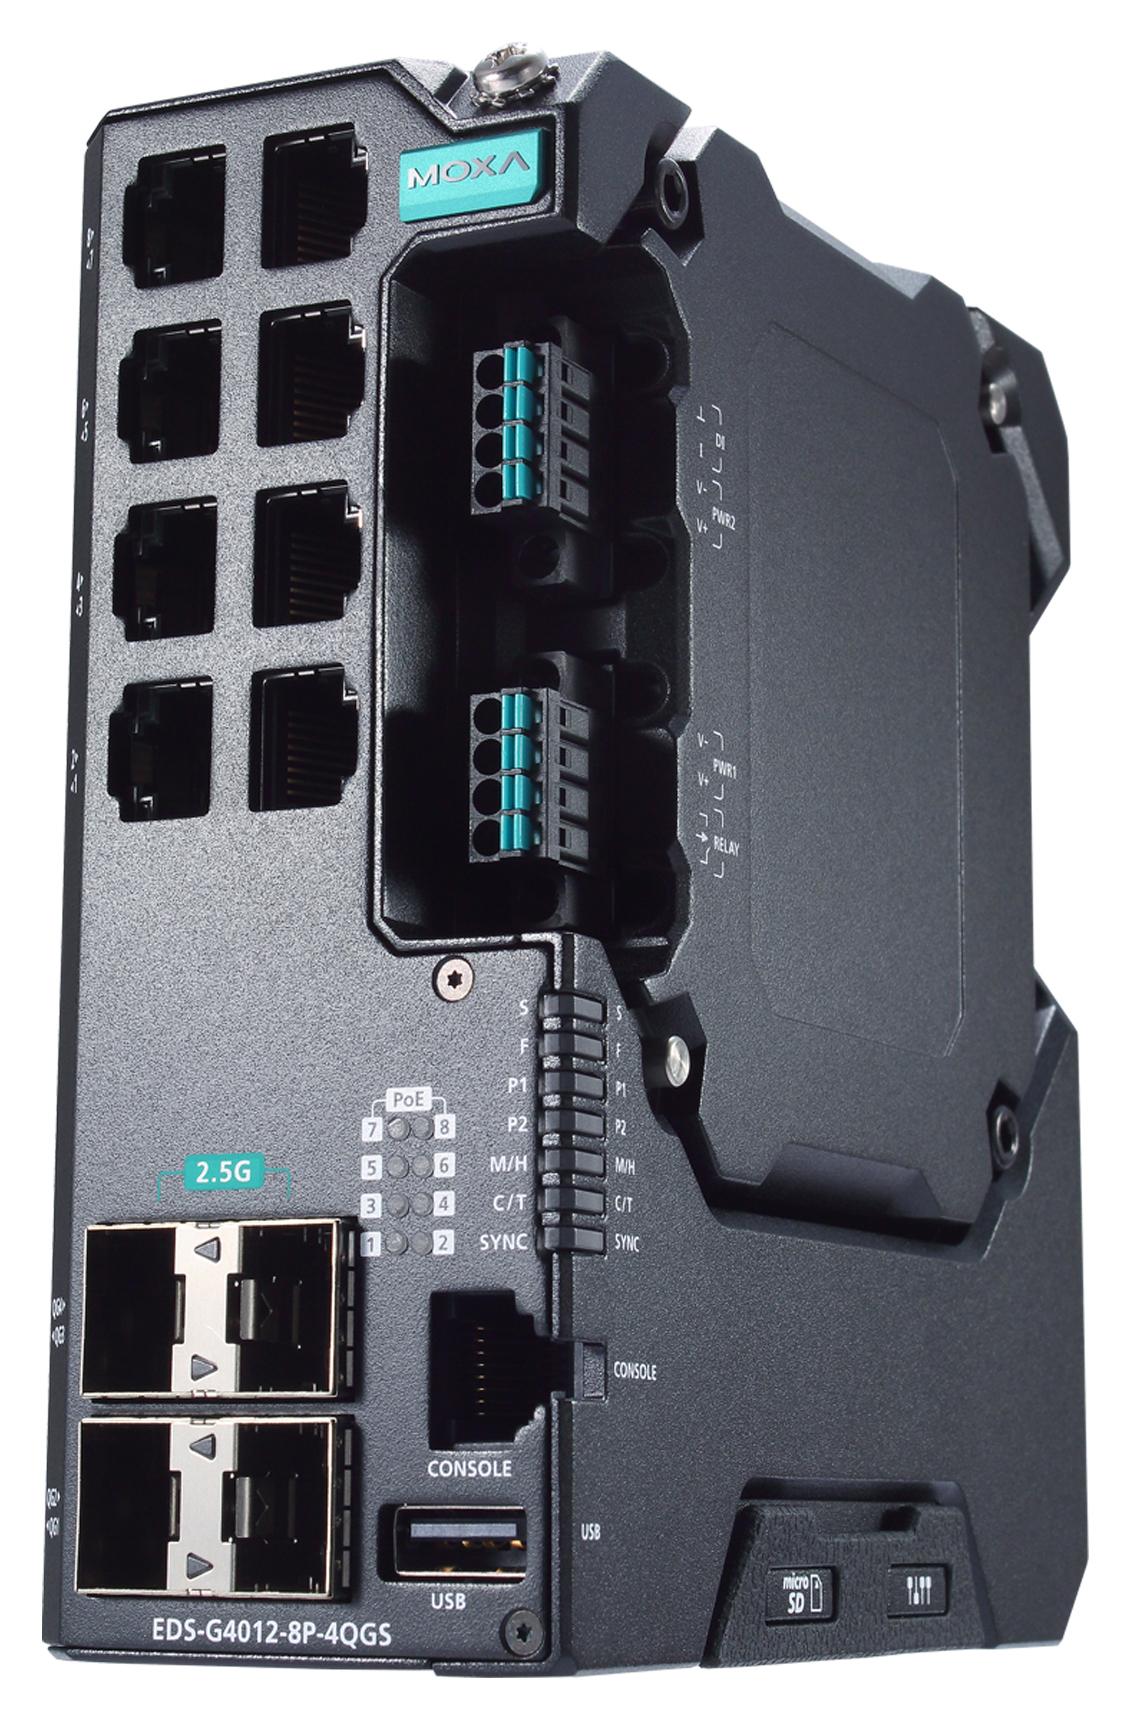 Next-Generation Networking Switches to Help Futureproof Industrial Automation